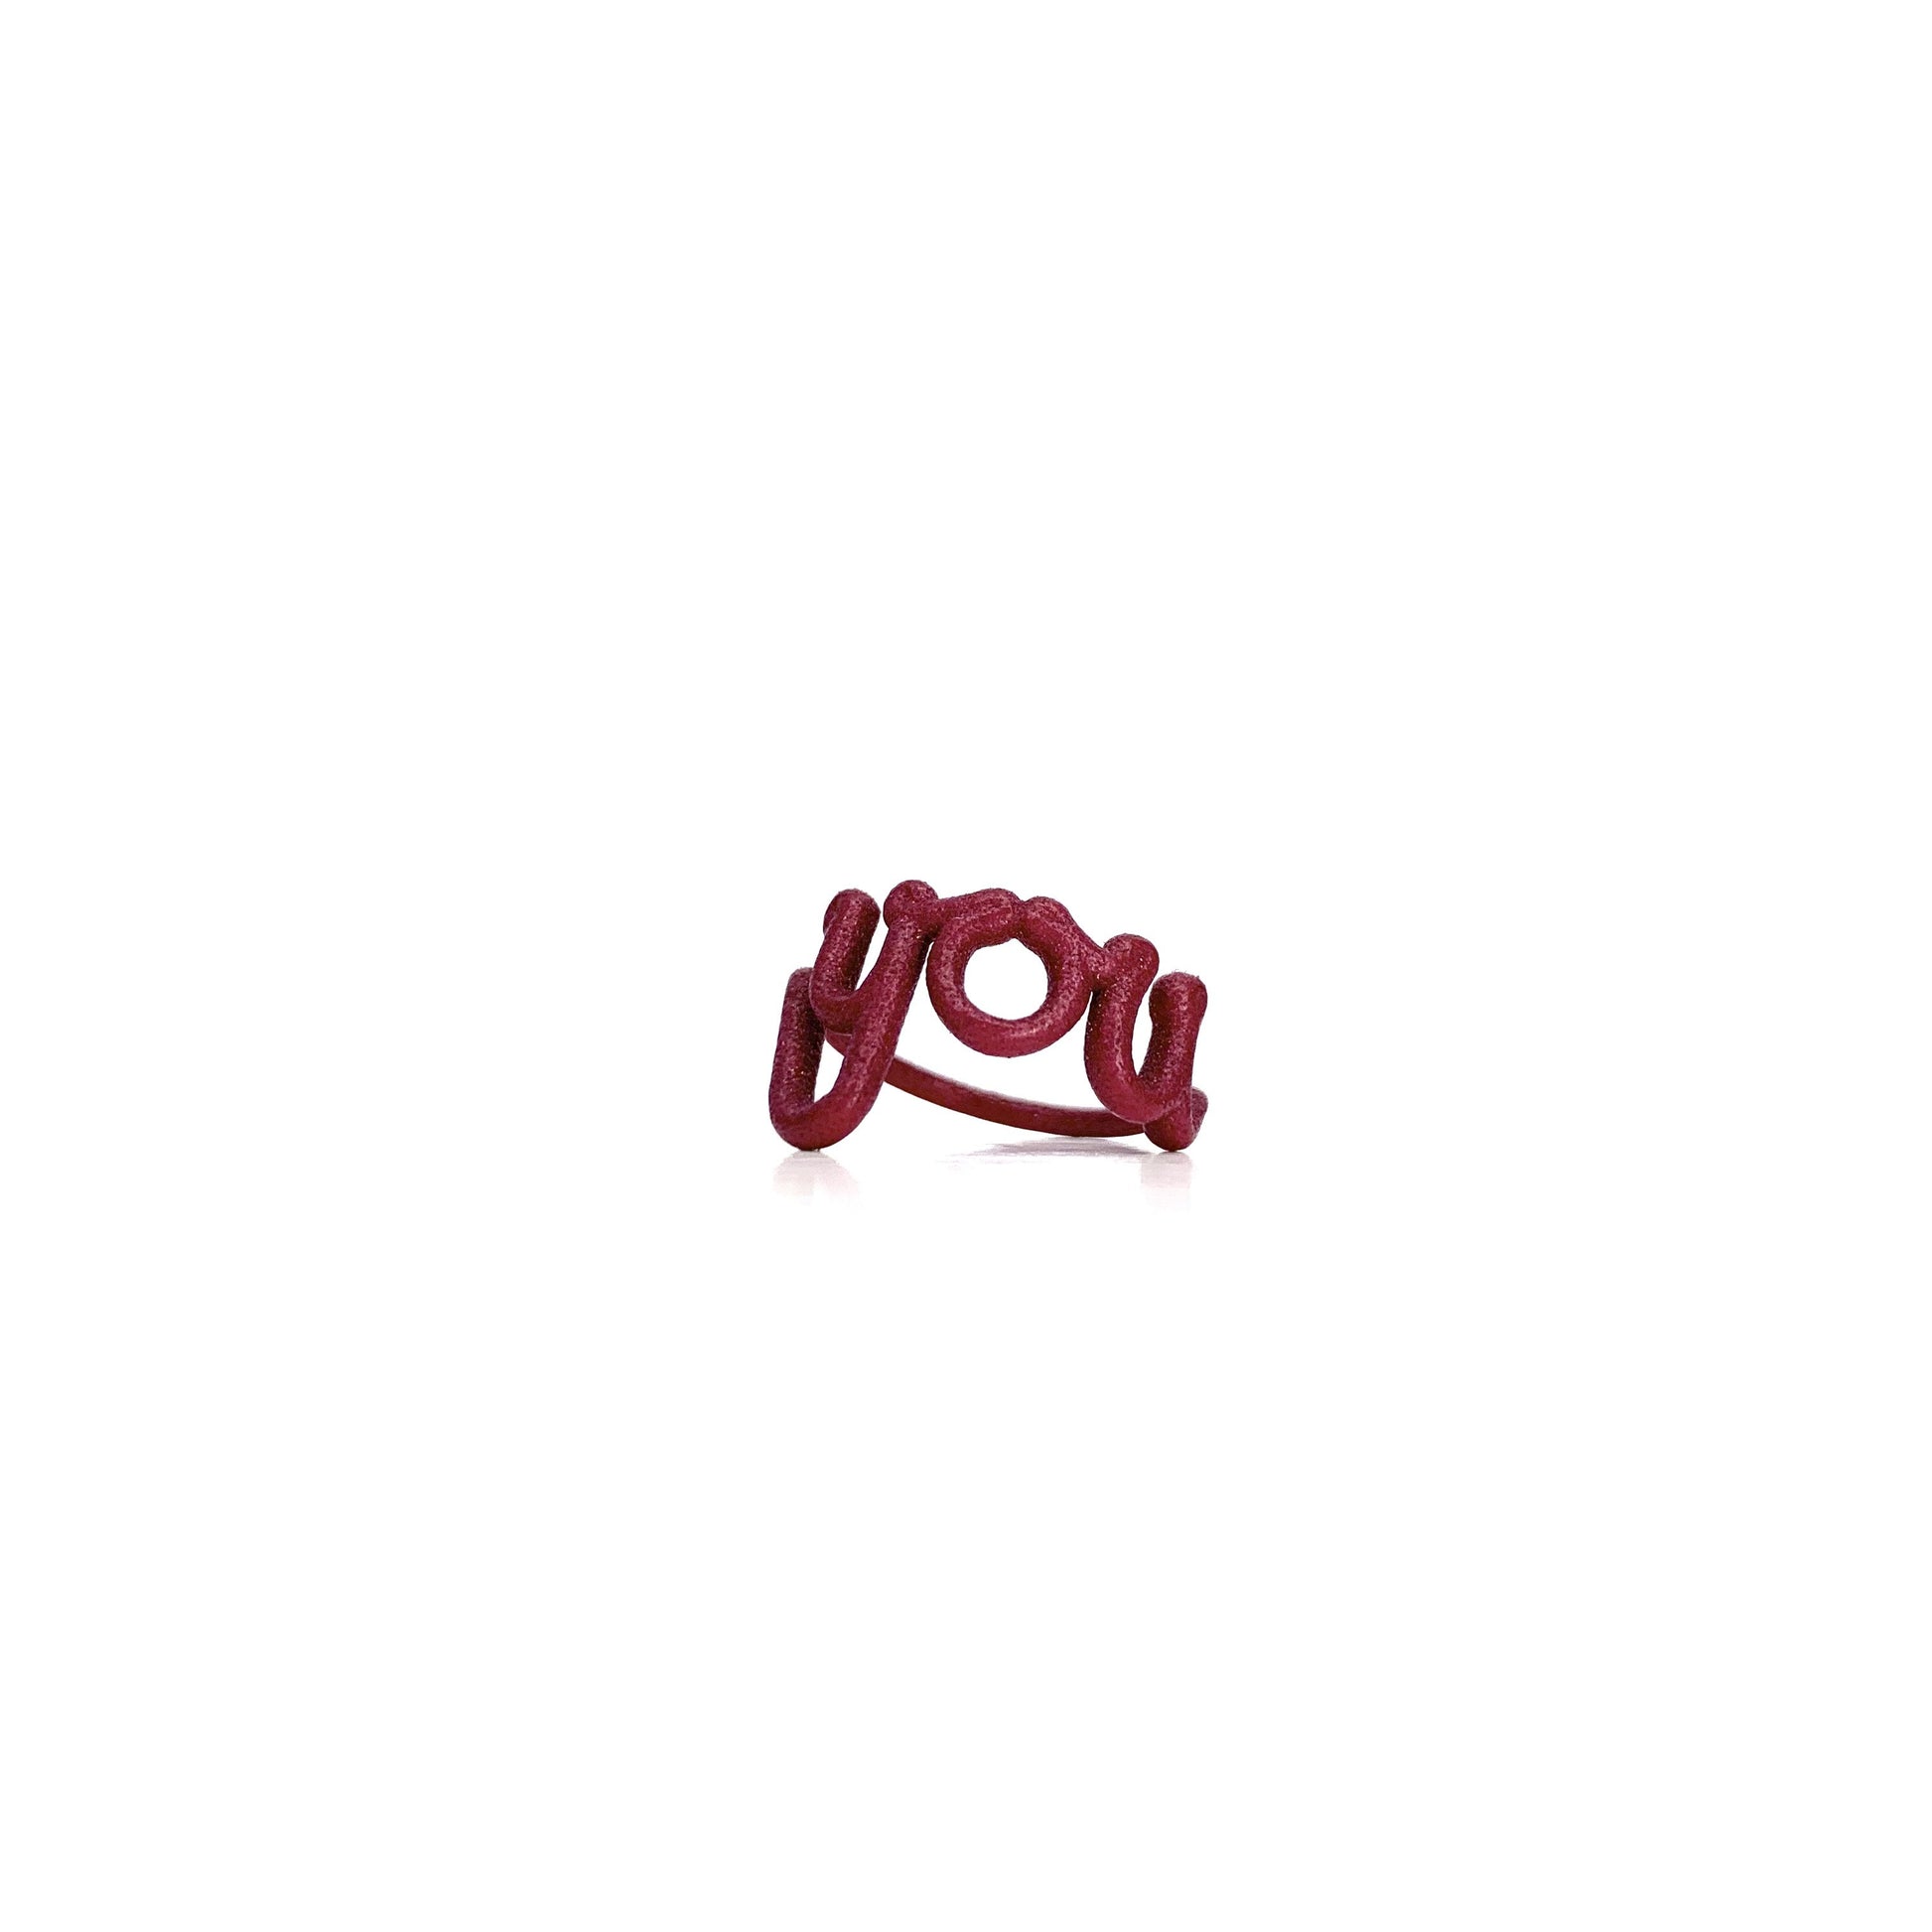 Zoe sherwood The Original This Is ‘You’ Statement Ring bordeaux